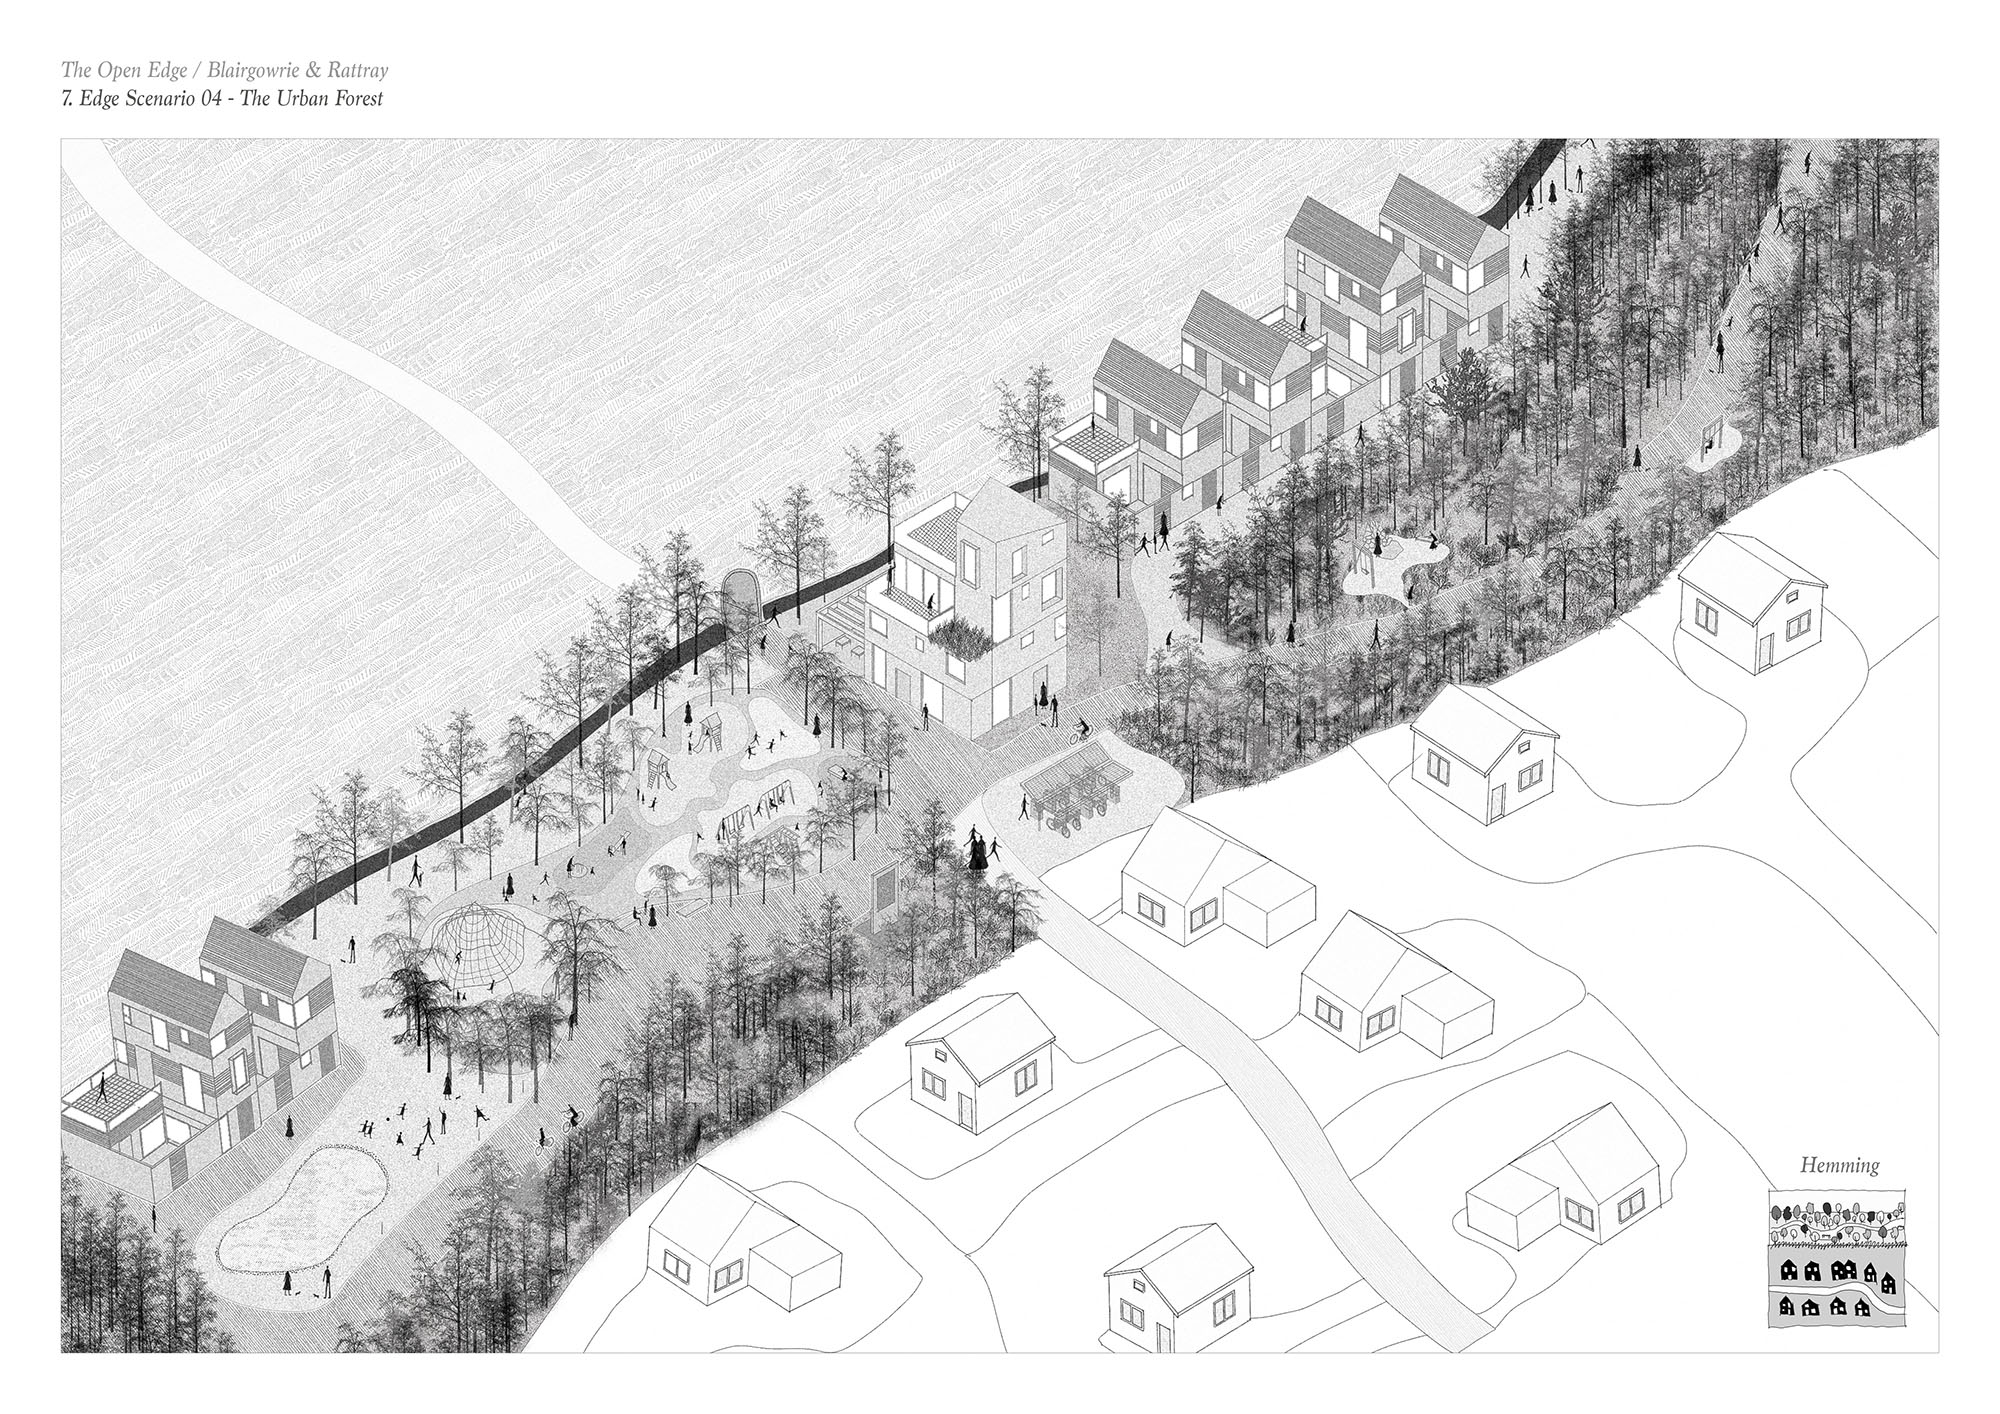 Page 7 of Sam Morman winning entry to the A&DS and RIAS Scottish Student Awards. The concept board includes architectural drawings an urban forest with housing and play areas nestled within the forest.